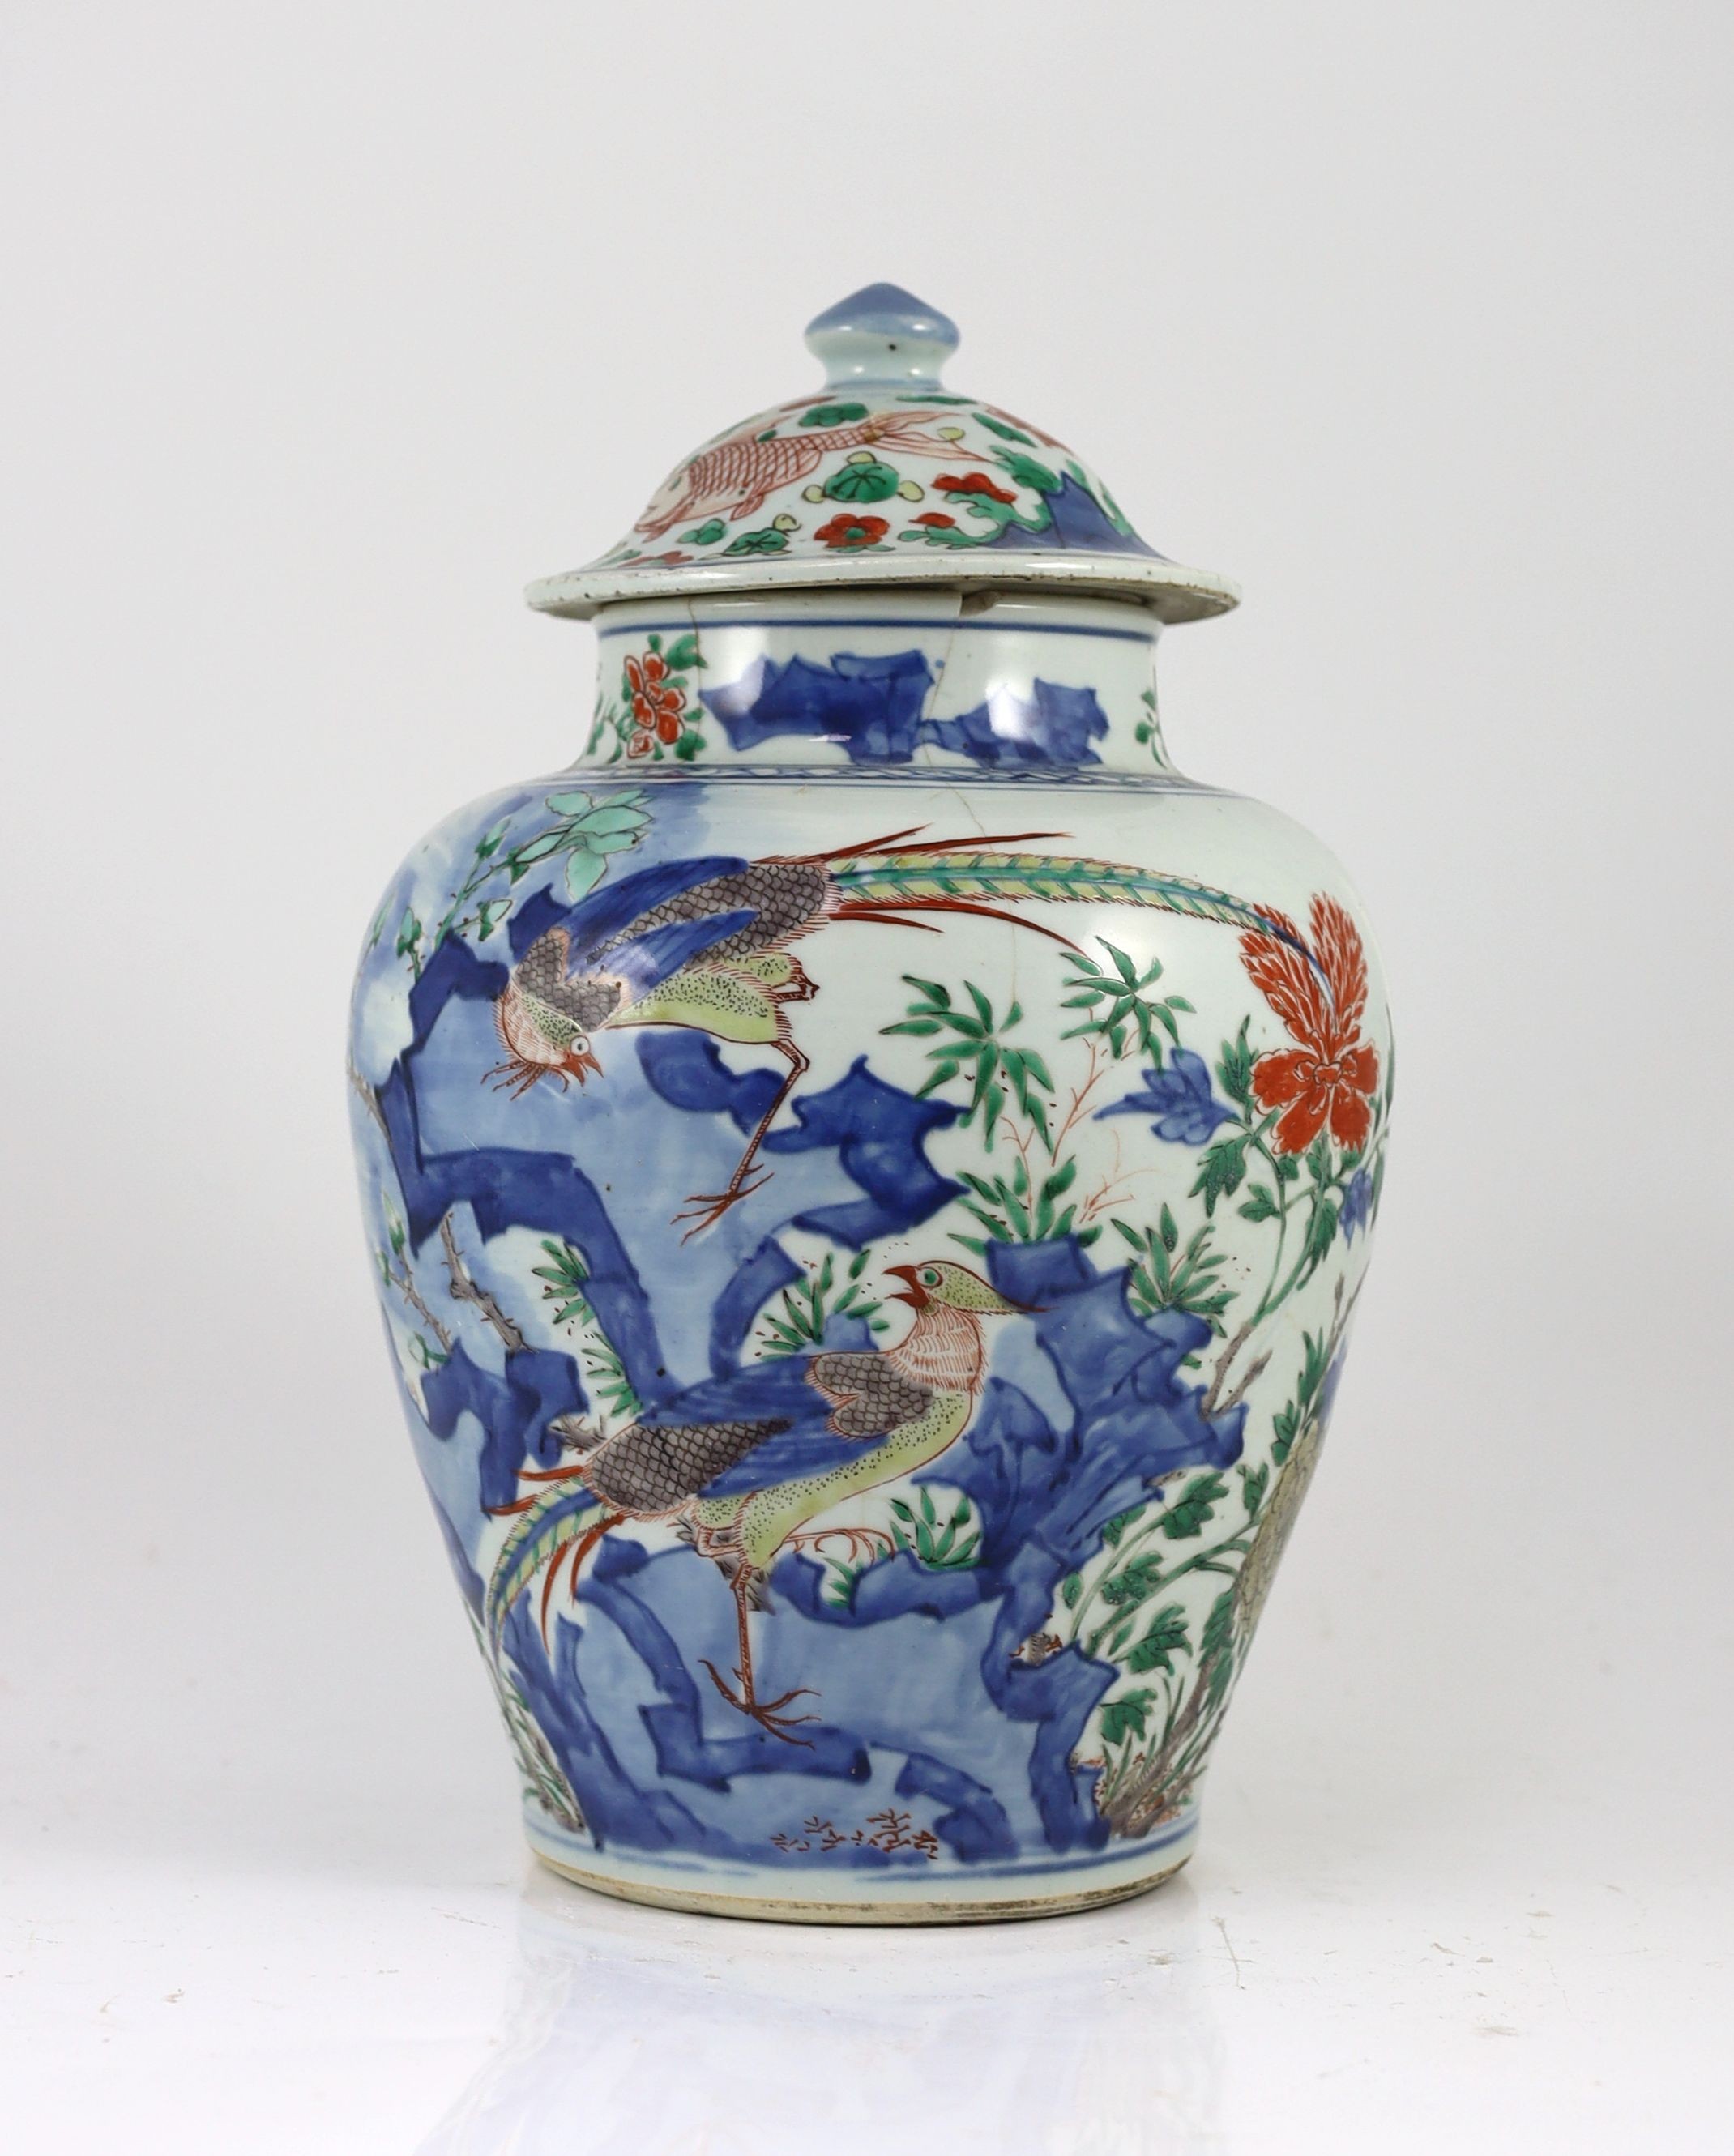 A Chinese transitional wucai jar and cover, c.1650, 36cm high, some damage